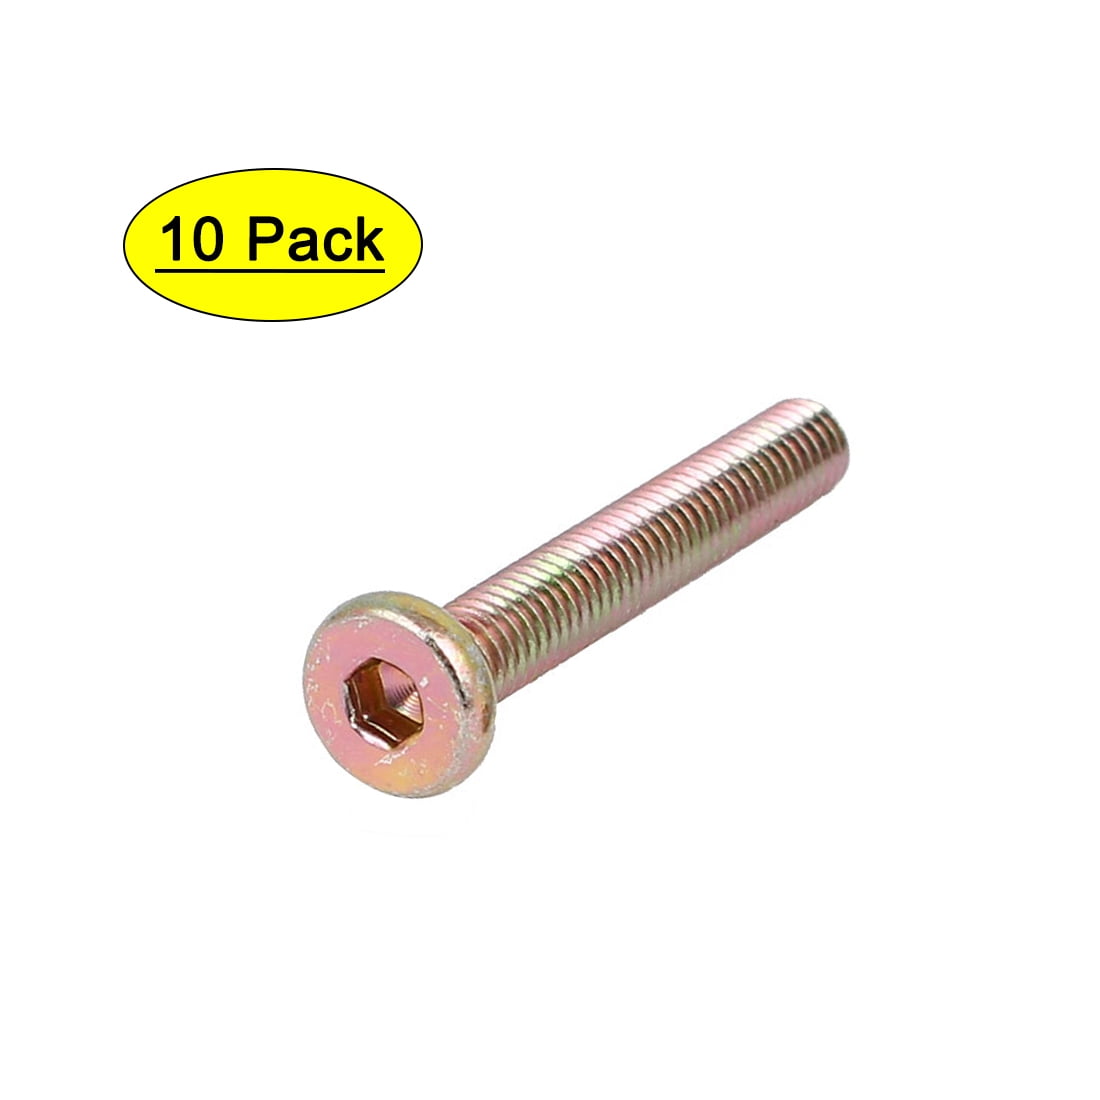 pack of 10 countersunk slot bolt bolts screw Machine screws with nuts M5 x 70 